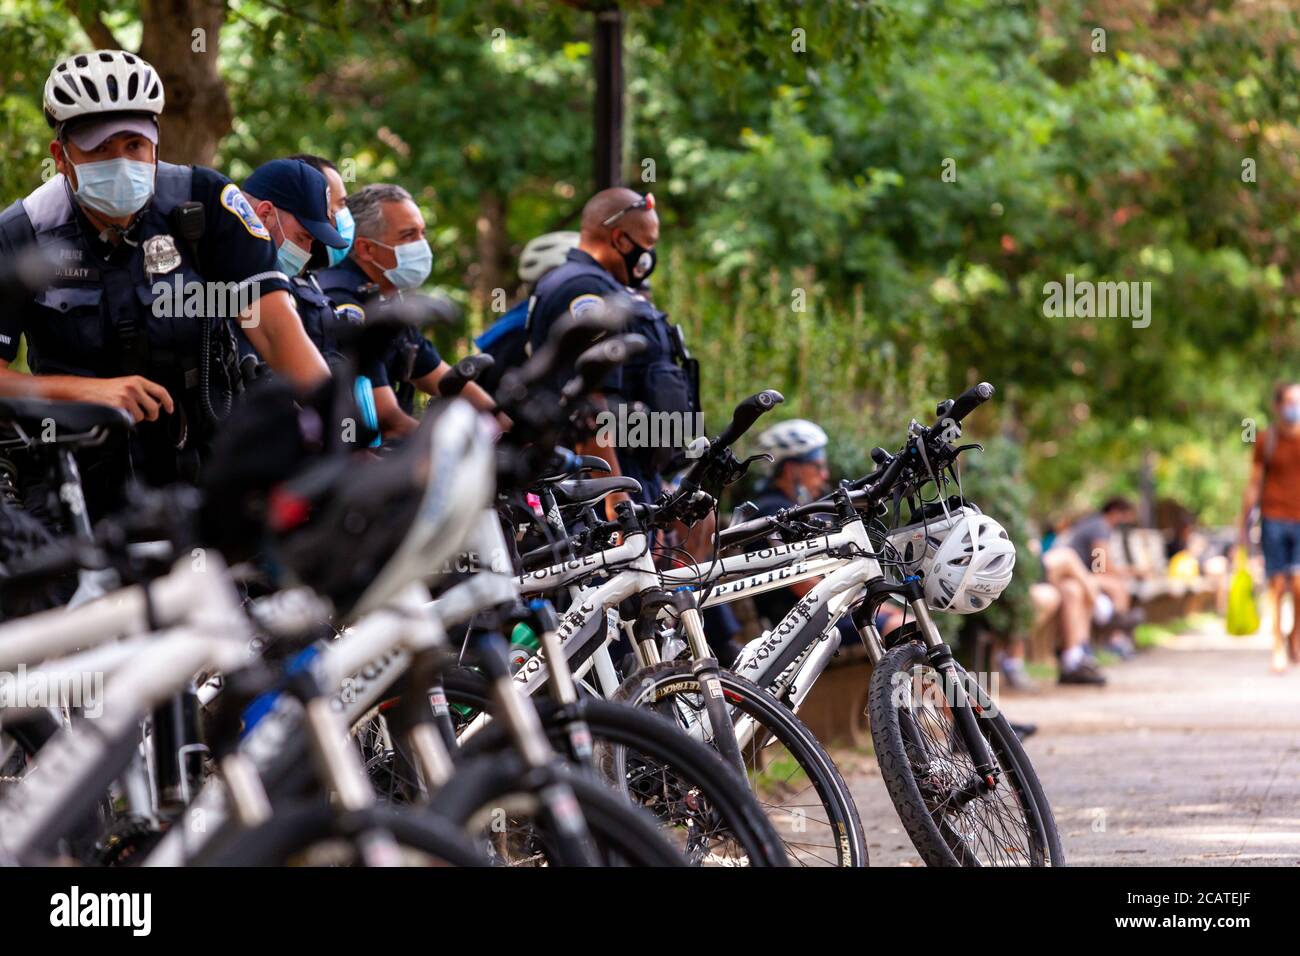 Washington, DC, USA. 8th Aug, 2020. Pictured: Metropolitan Police (DC Police) officersin a show of force to intimidate protesters in Meridian Hill Park (a.k.a. Malcolm X Park).  The bicycle officers were not part of the normal police escort for First Amendment demonstrations, and protest organizers were unaware that they would be present.  Credit: Allison C Bailey/Alamy Credit: Allison Bailey/Alamy Live News Stock Photo